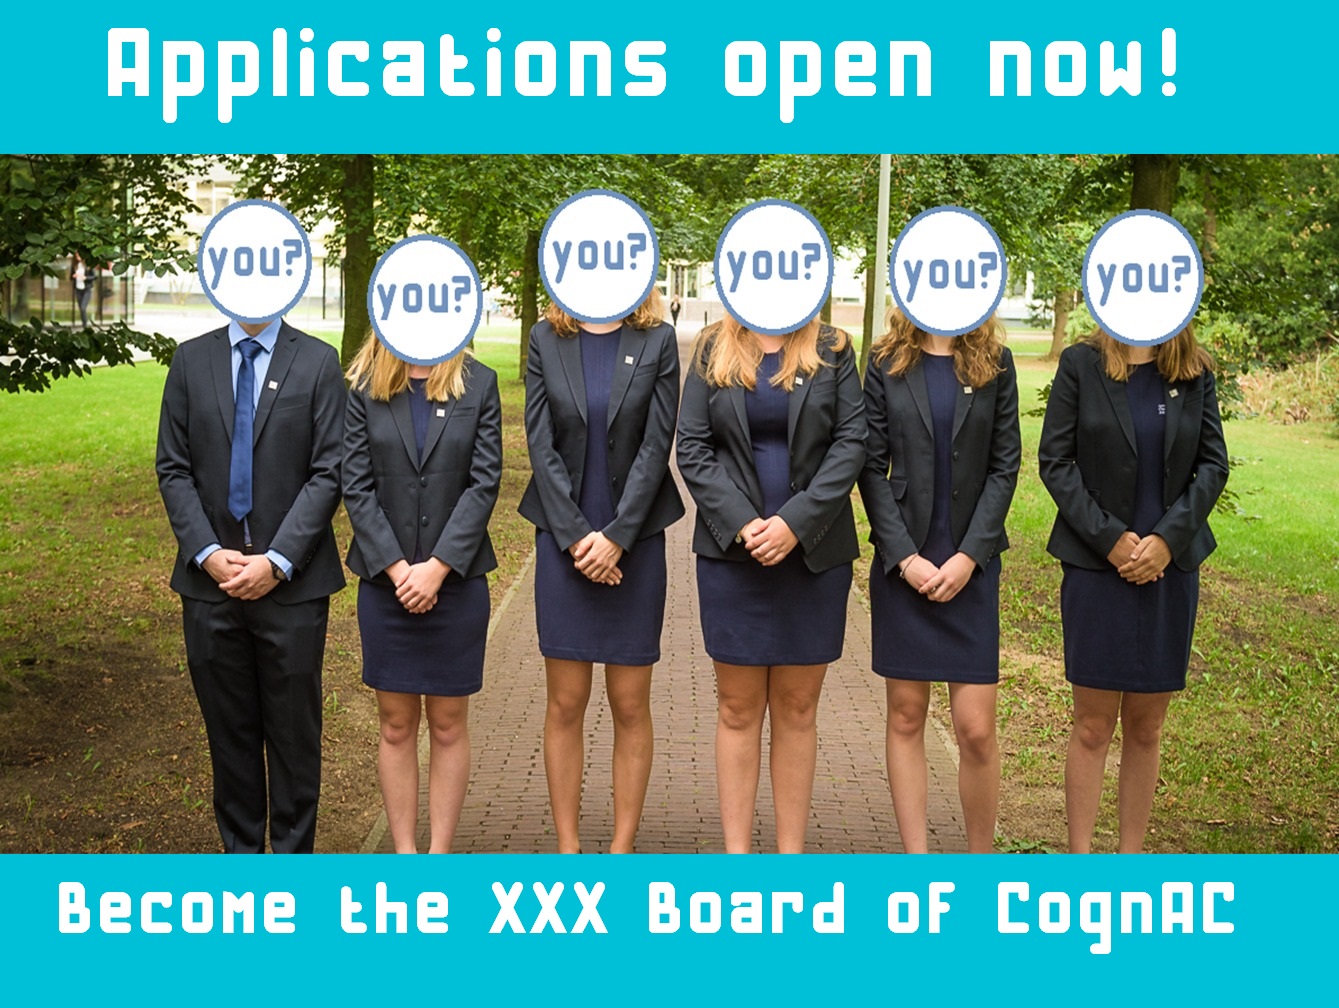 Board applications are open!